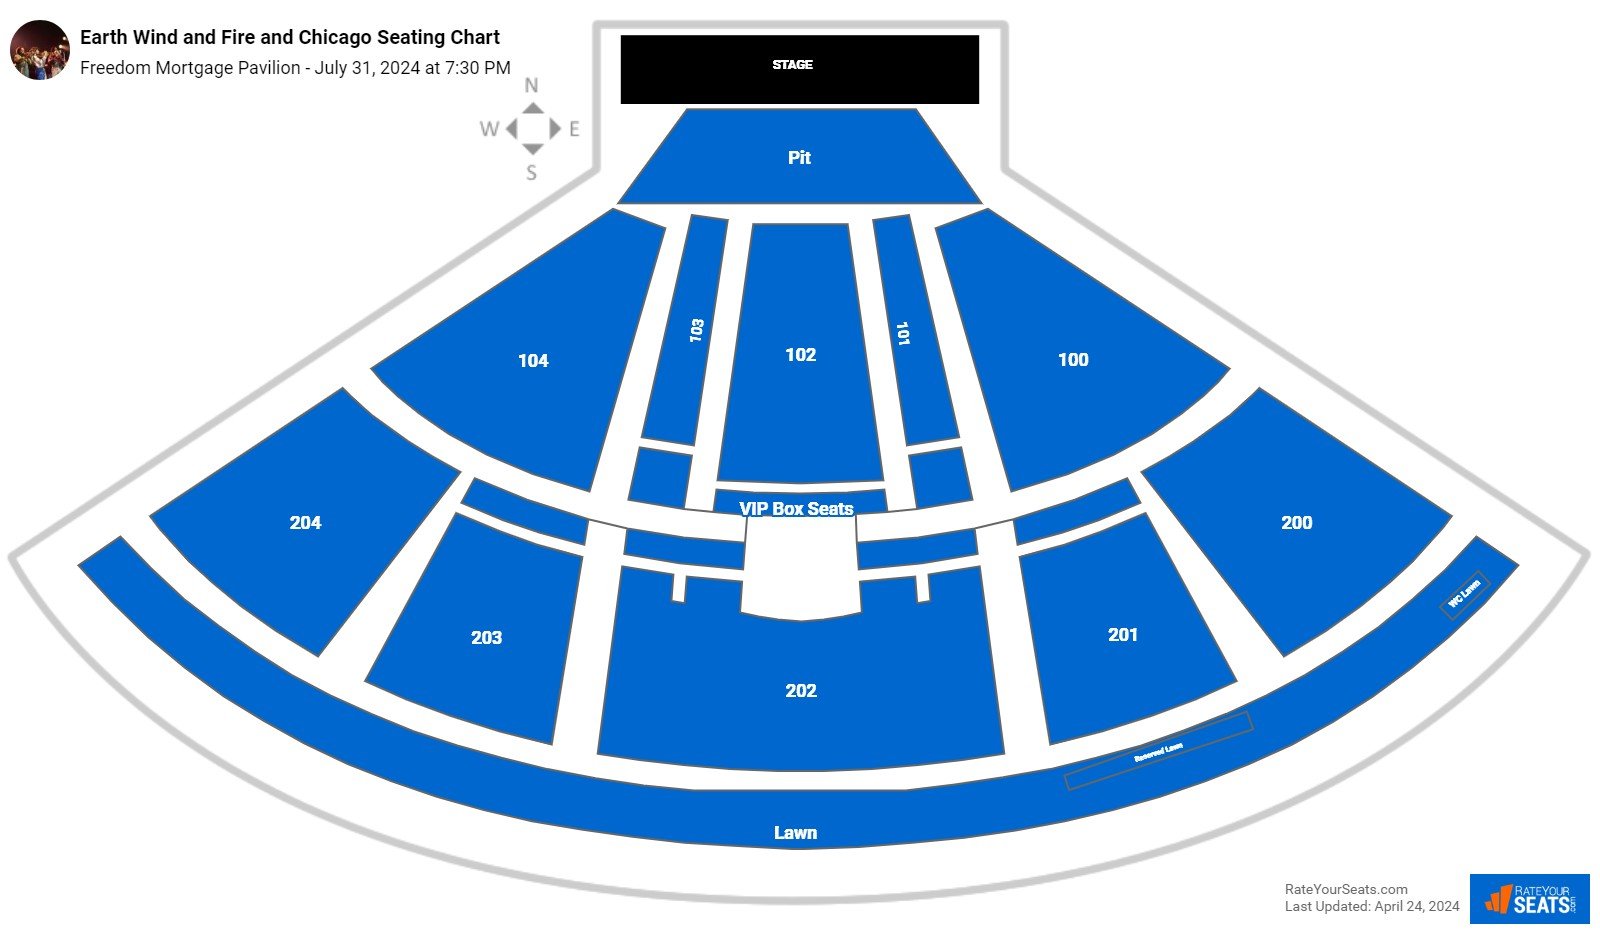 Earth Wind and Fire and Chicago seating chart Freedom Mortgage Pavilion